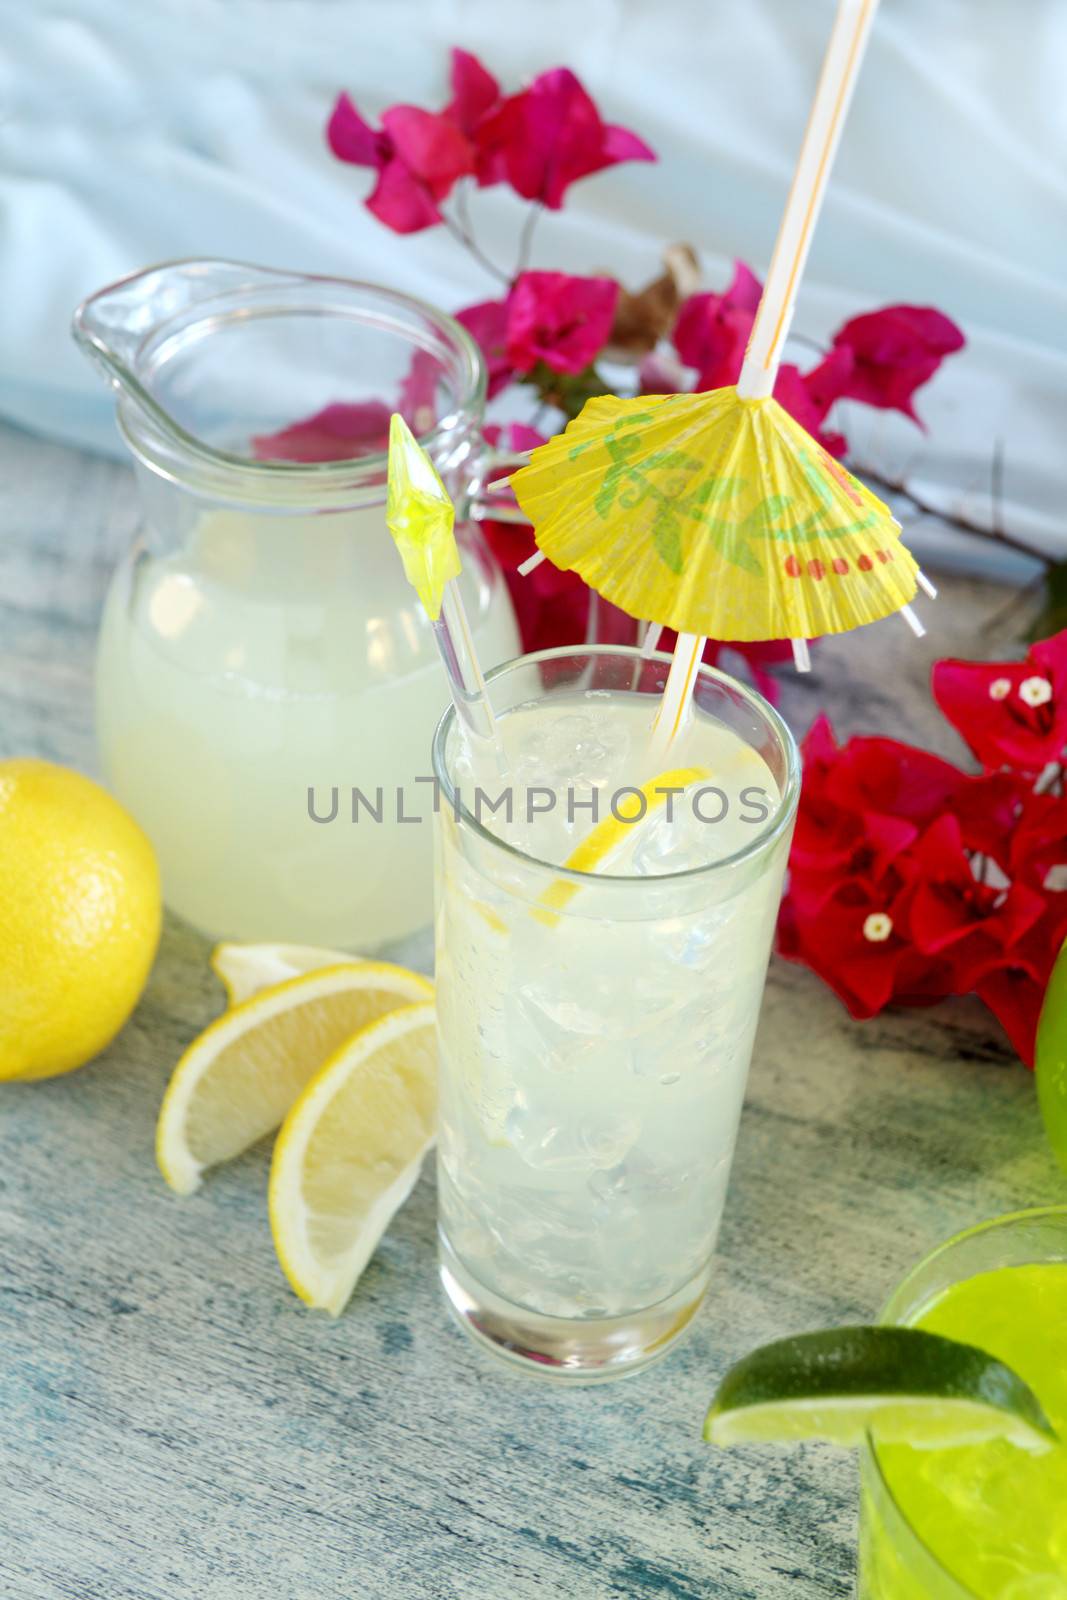 Ice cold lemon drink with cocktail umbrella and stirrer.